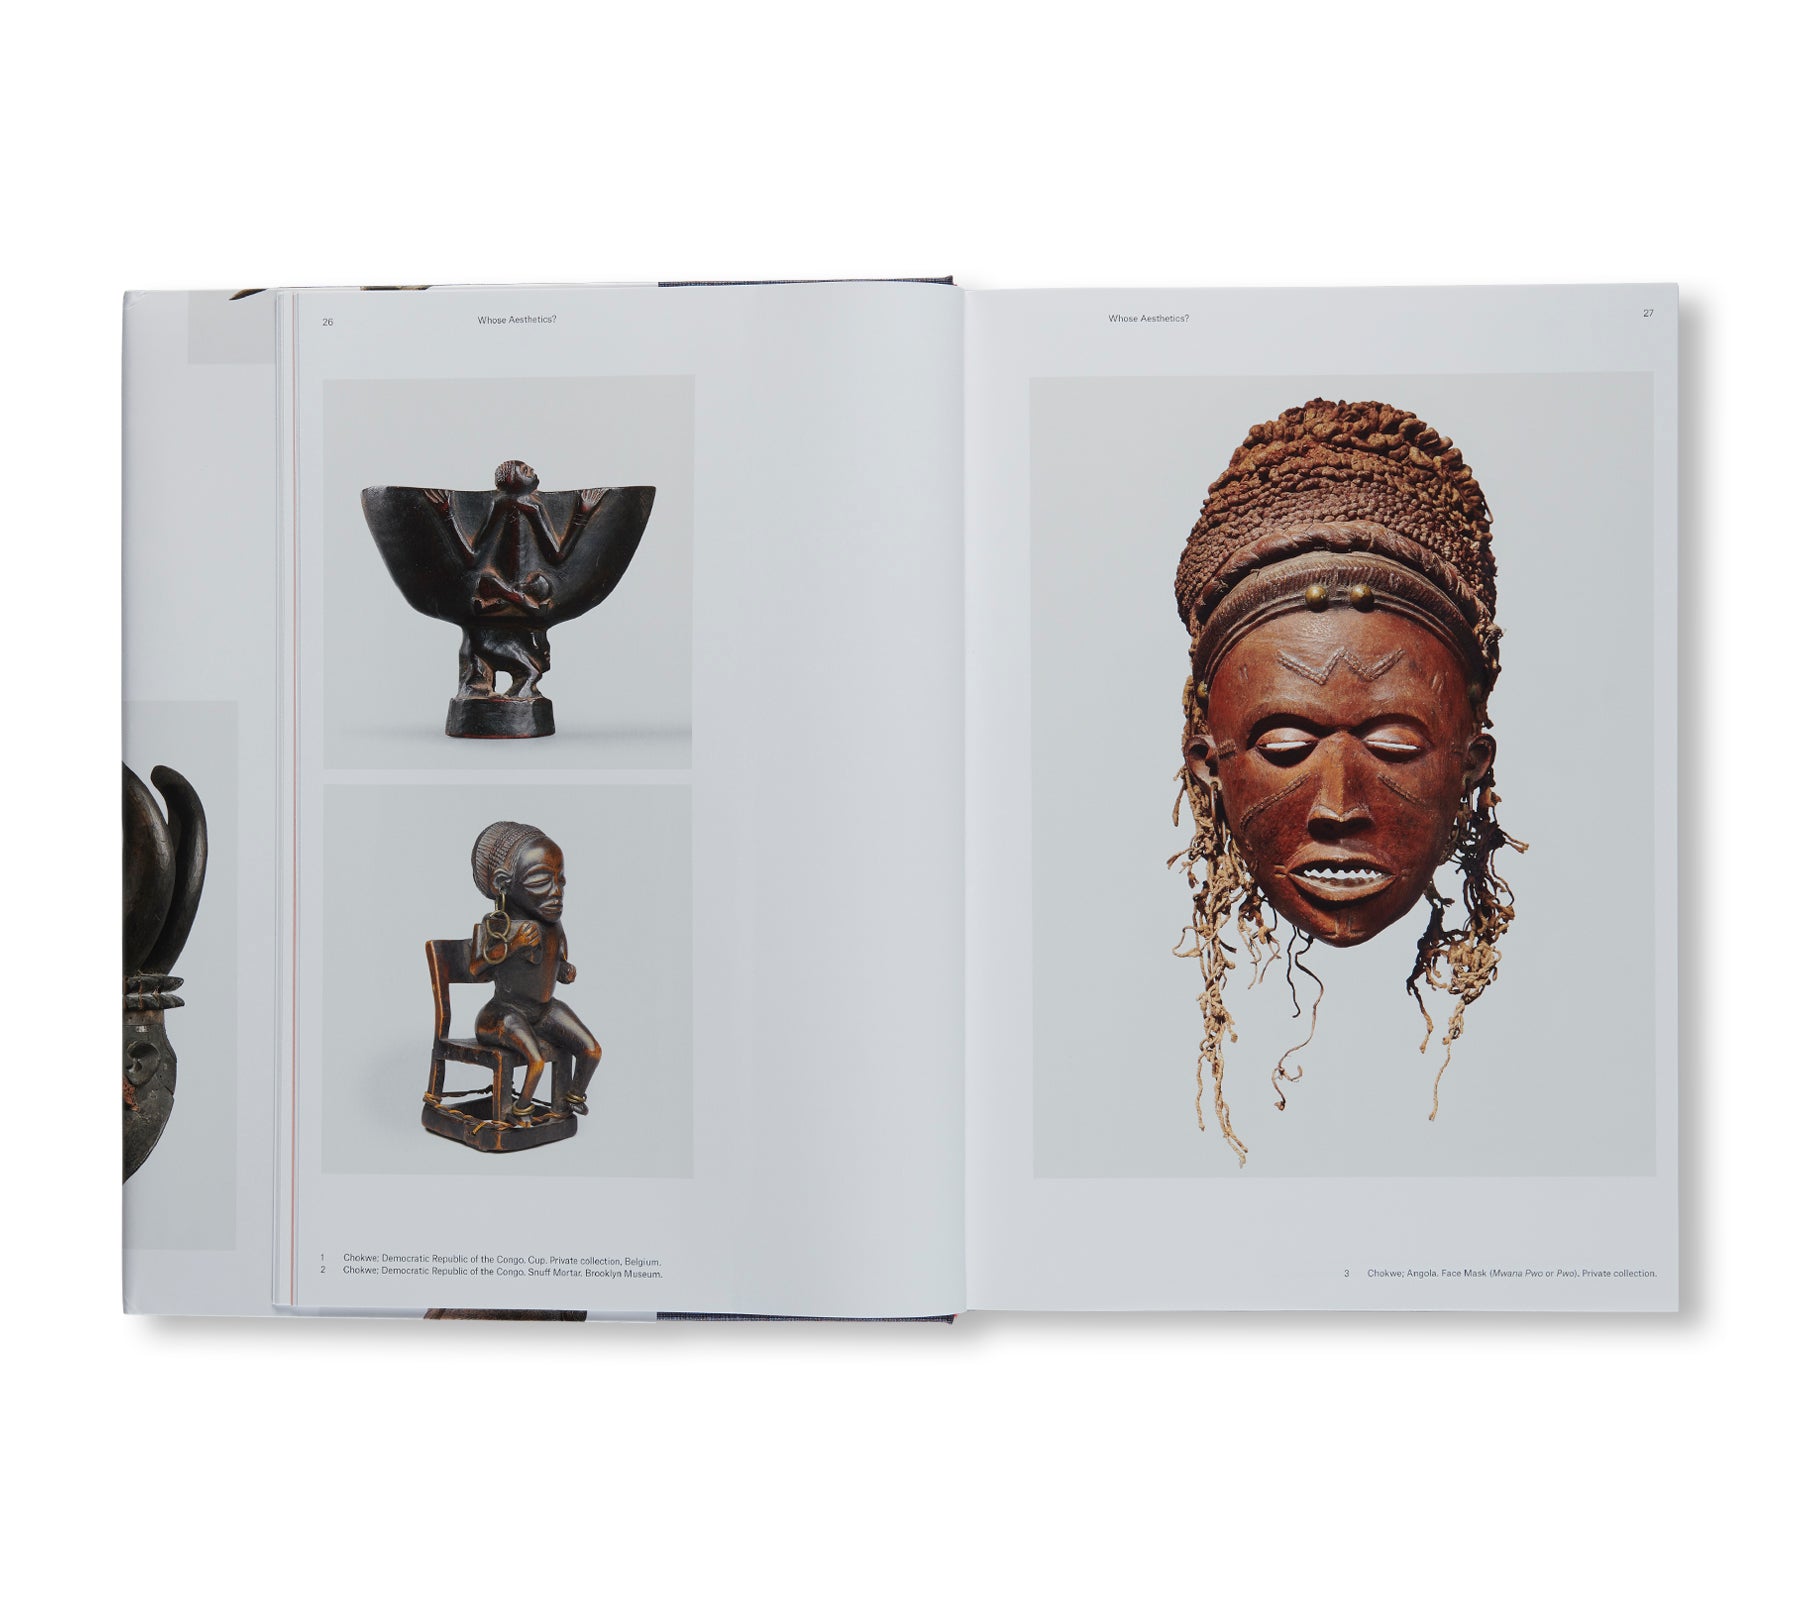 THE LANGUAGE OF BEAUTY IN AFRICAN ART